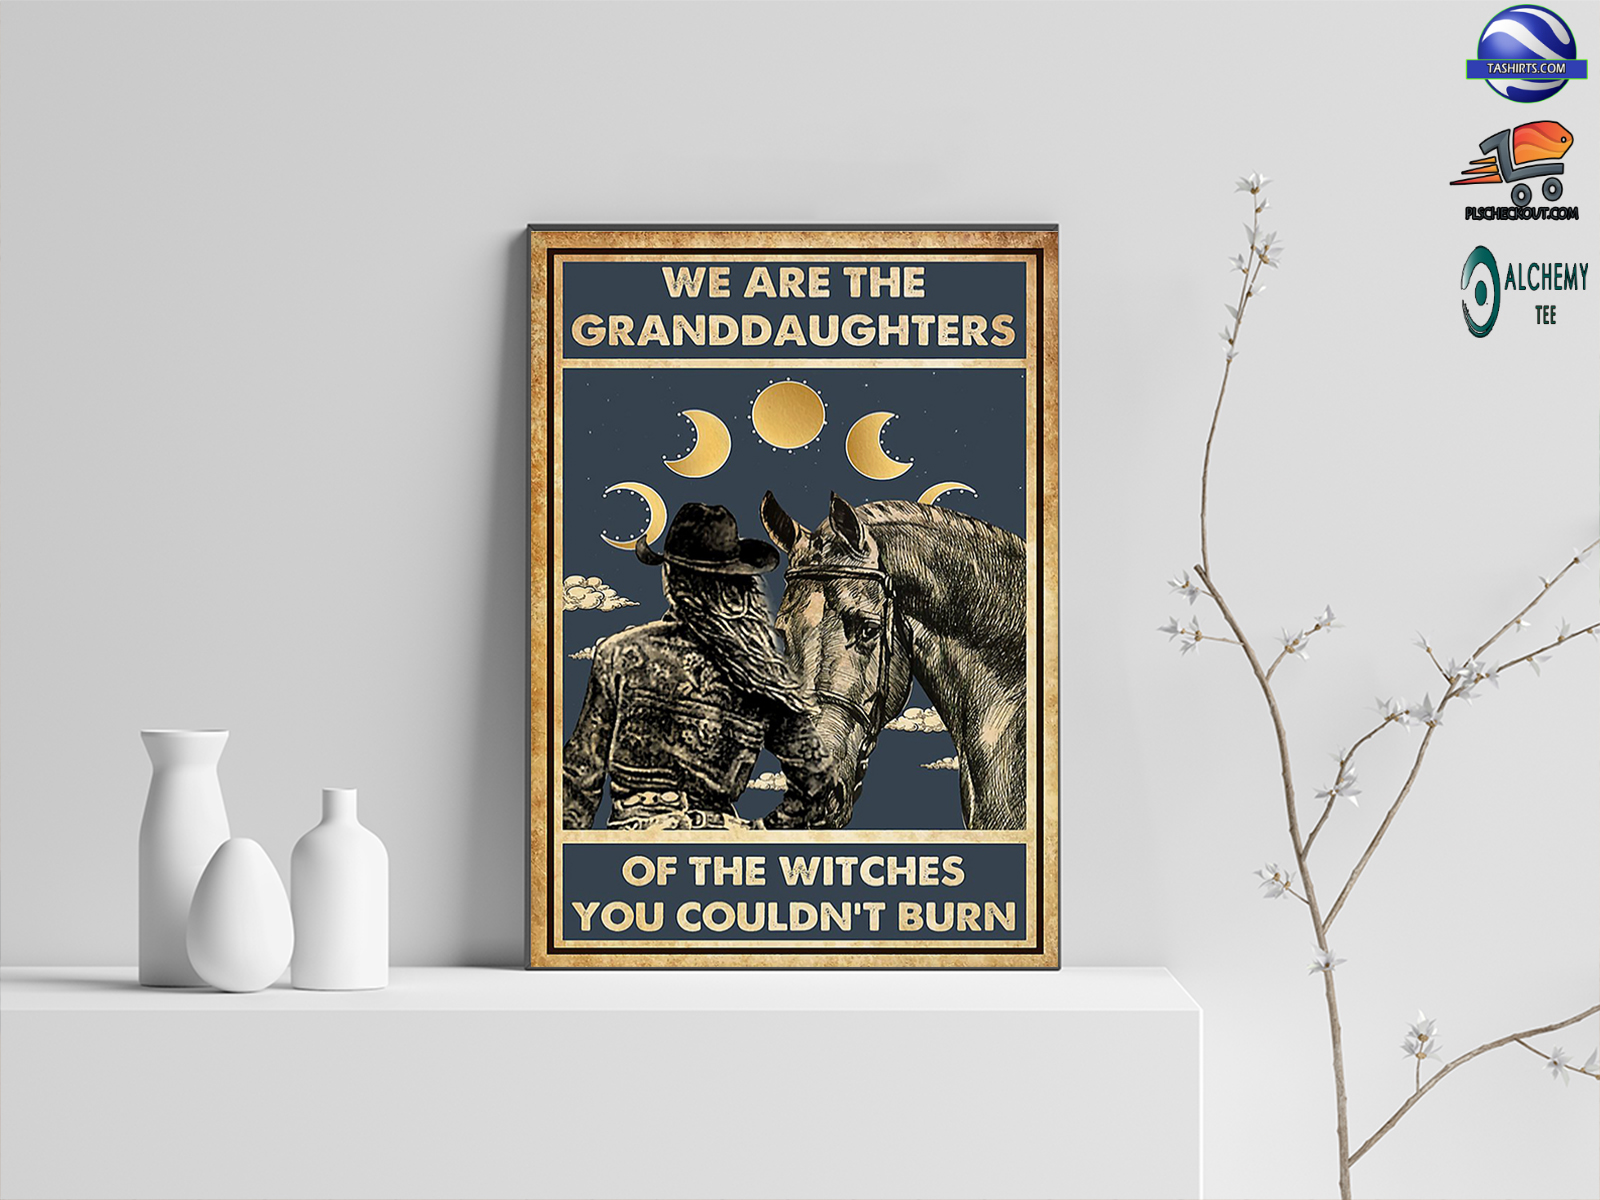 We are the granddaughters of the witches you couldn’t burn poster